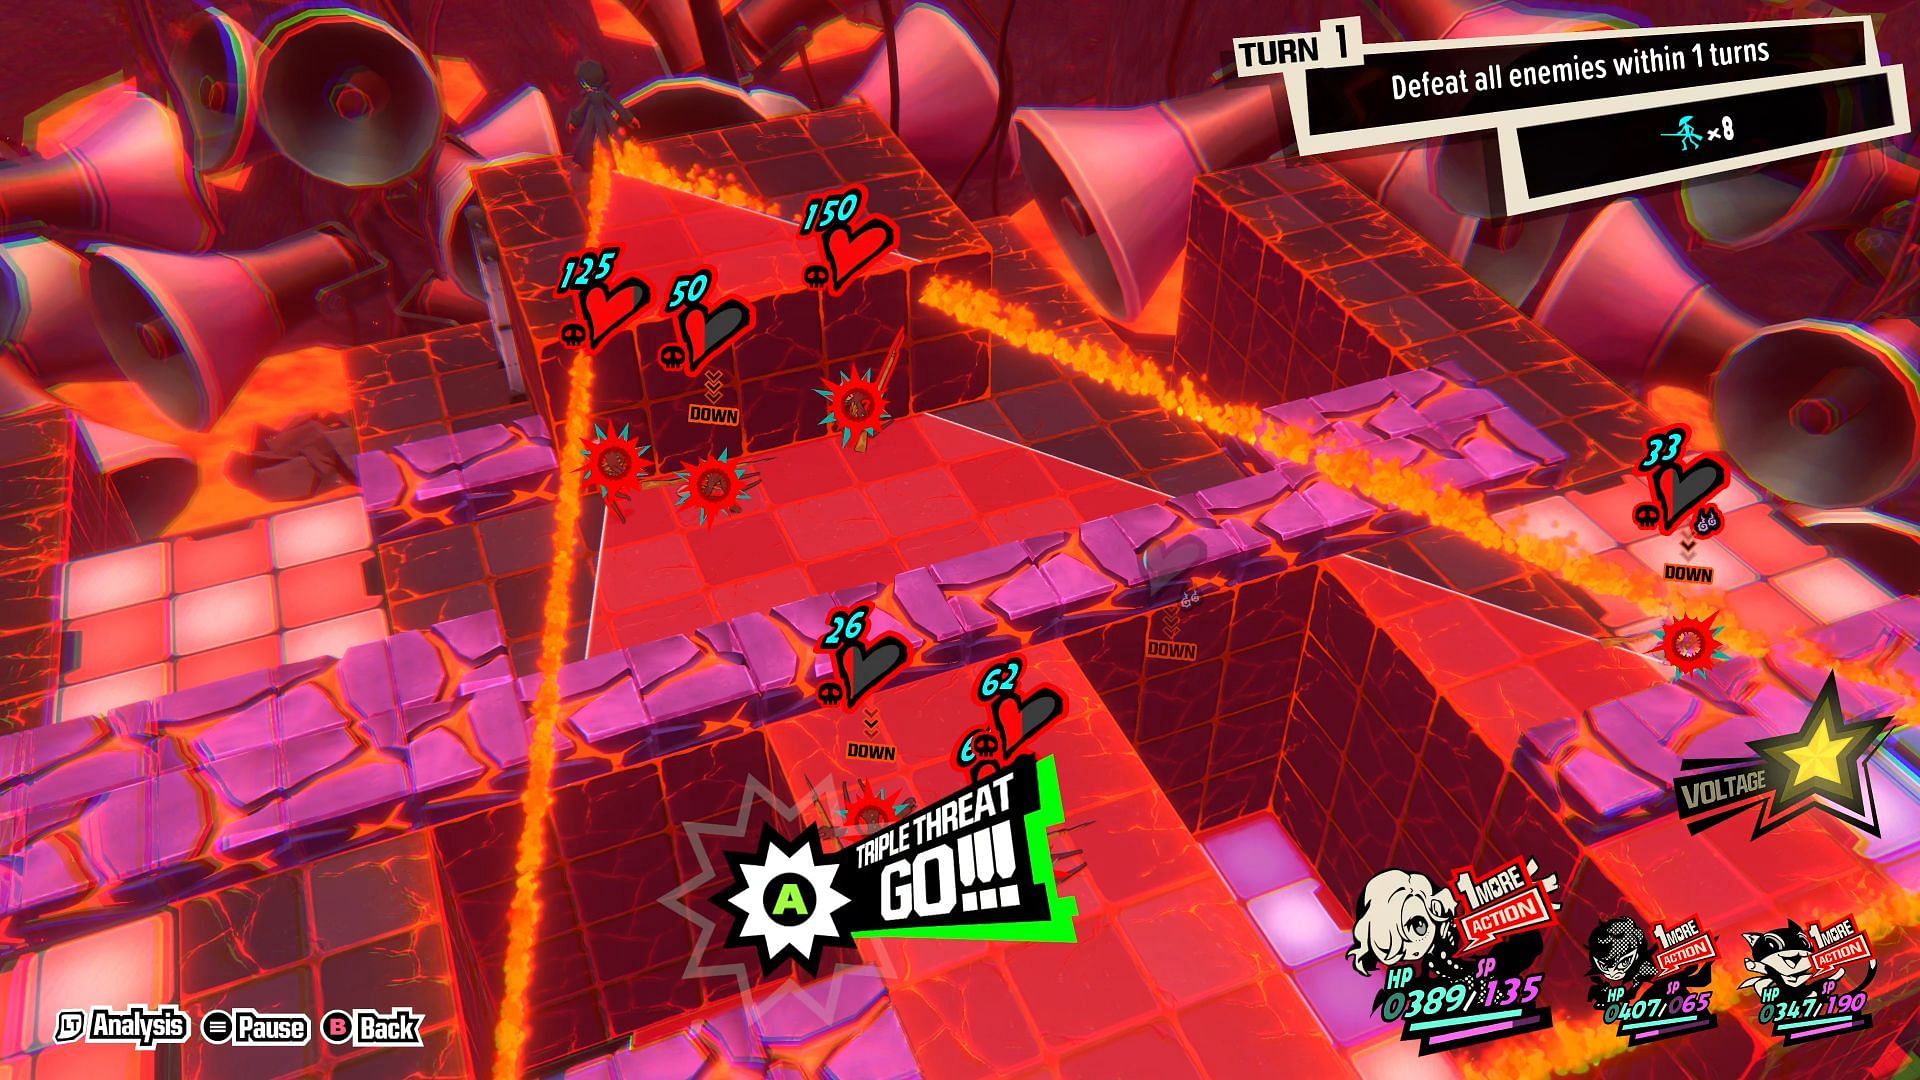 Position Triple-Threat to take out all enemies in one go (Image via Atlus)